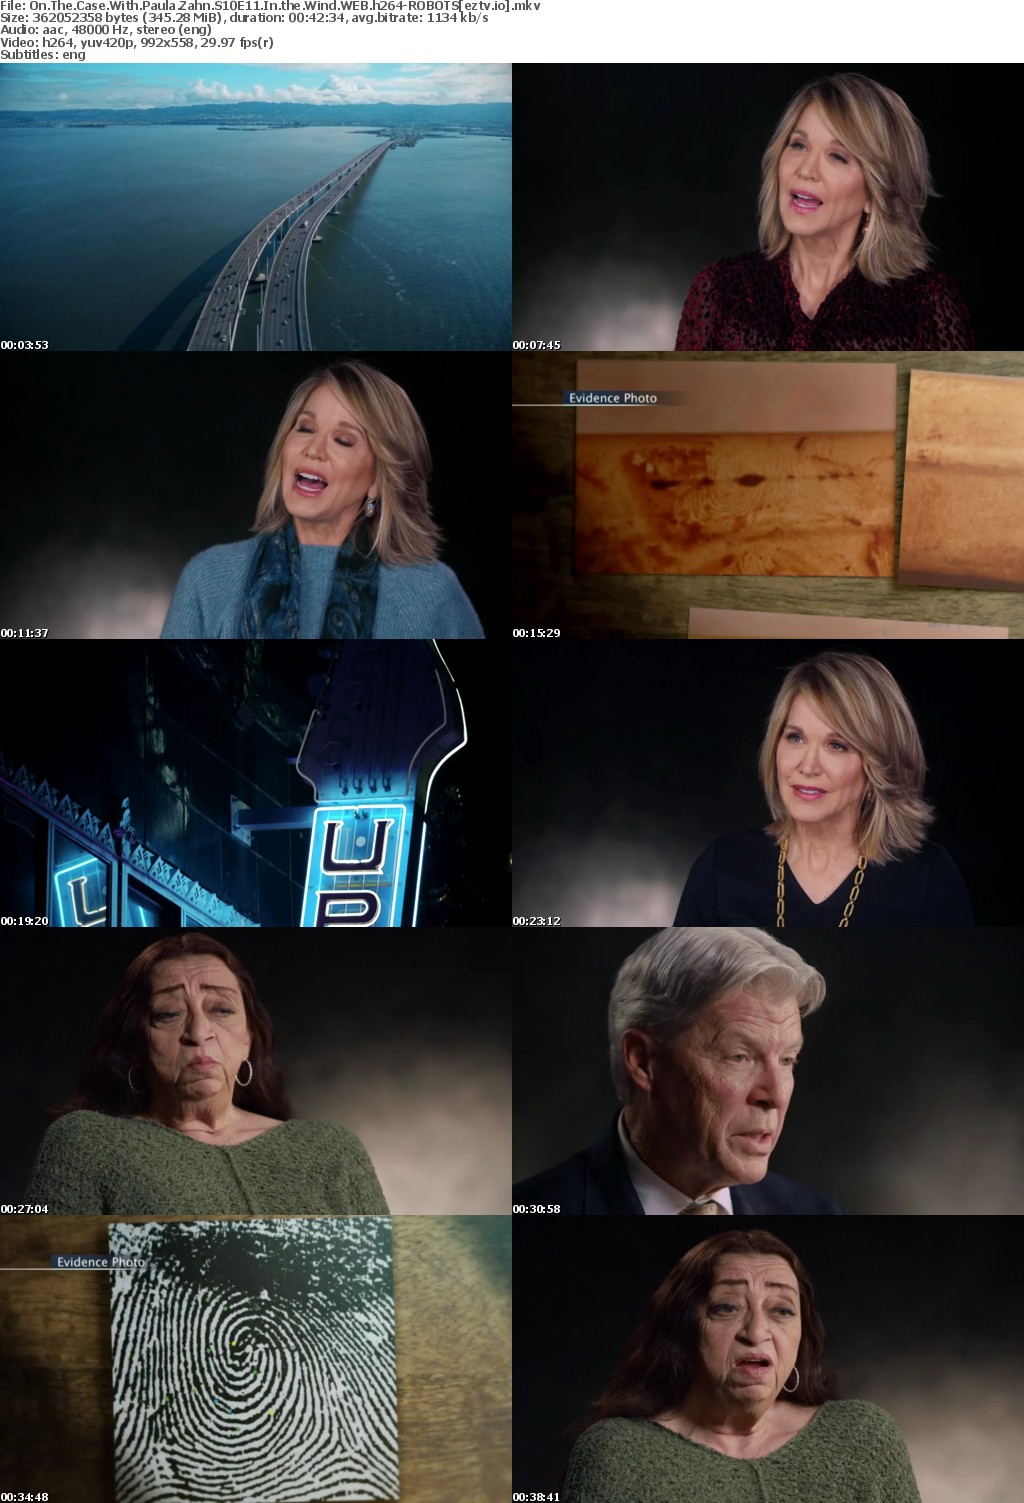 On The Case With Paula Zahn S10E11 In the Wind WEB h264-ROBOTS